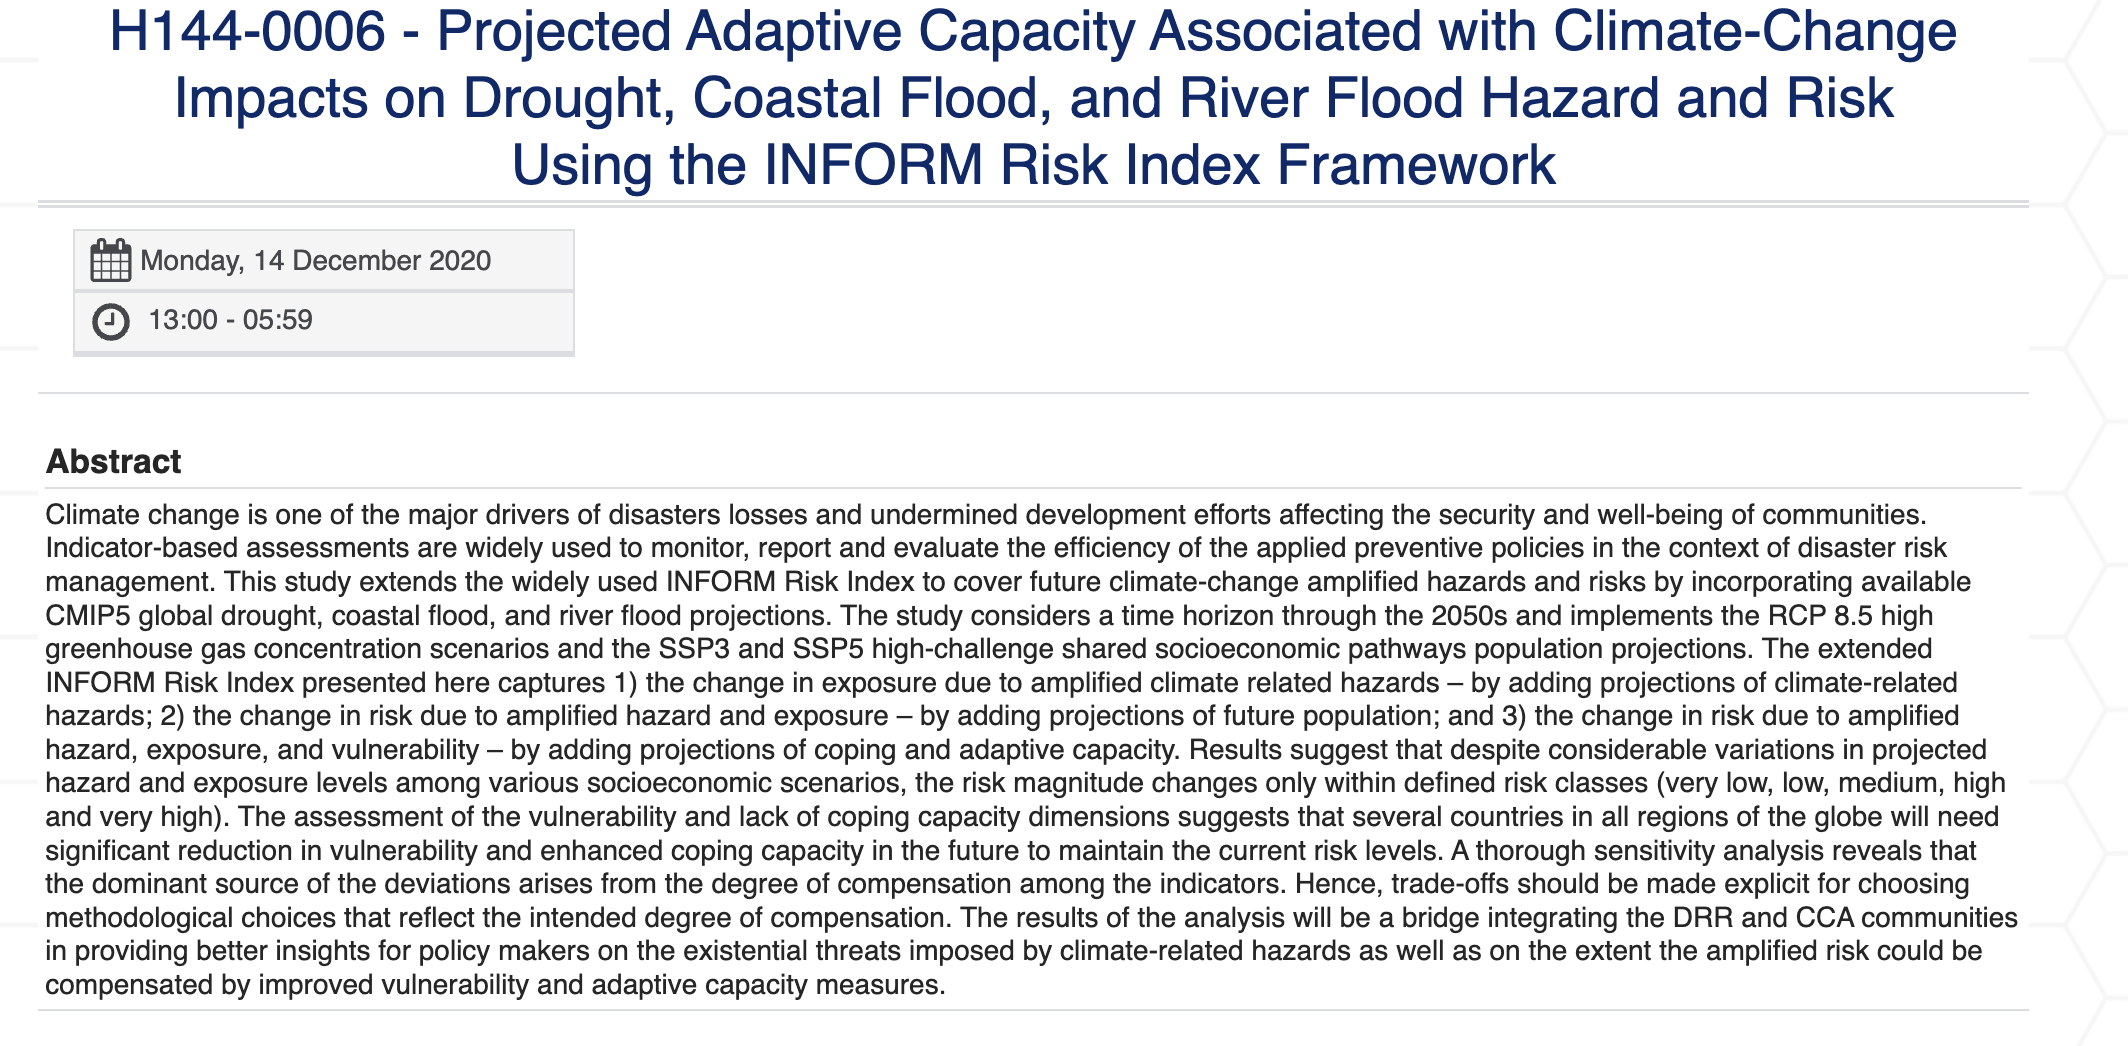 WP5 International cooperation, development and resilience- Projected Adaptive Capacity Associated with Climate-Change Impacts on Drought, Coastal Flood, and River Flood Hazard and Risk Using the INFORM Risk Index Framework